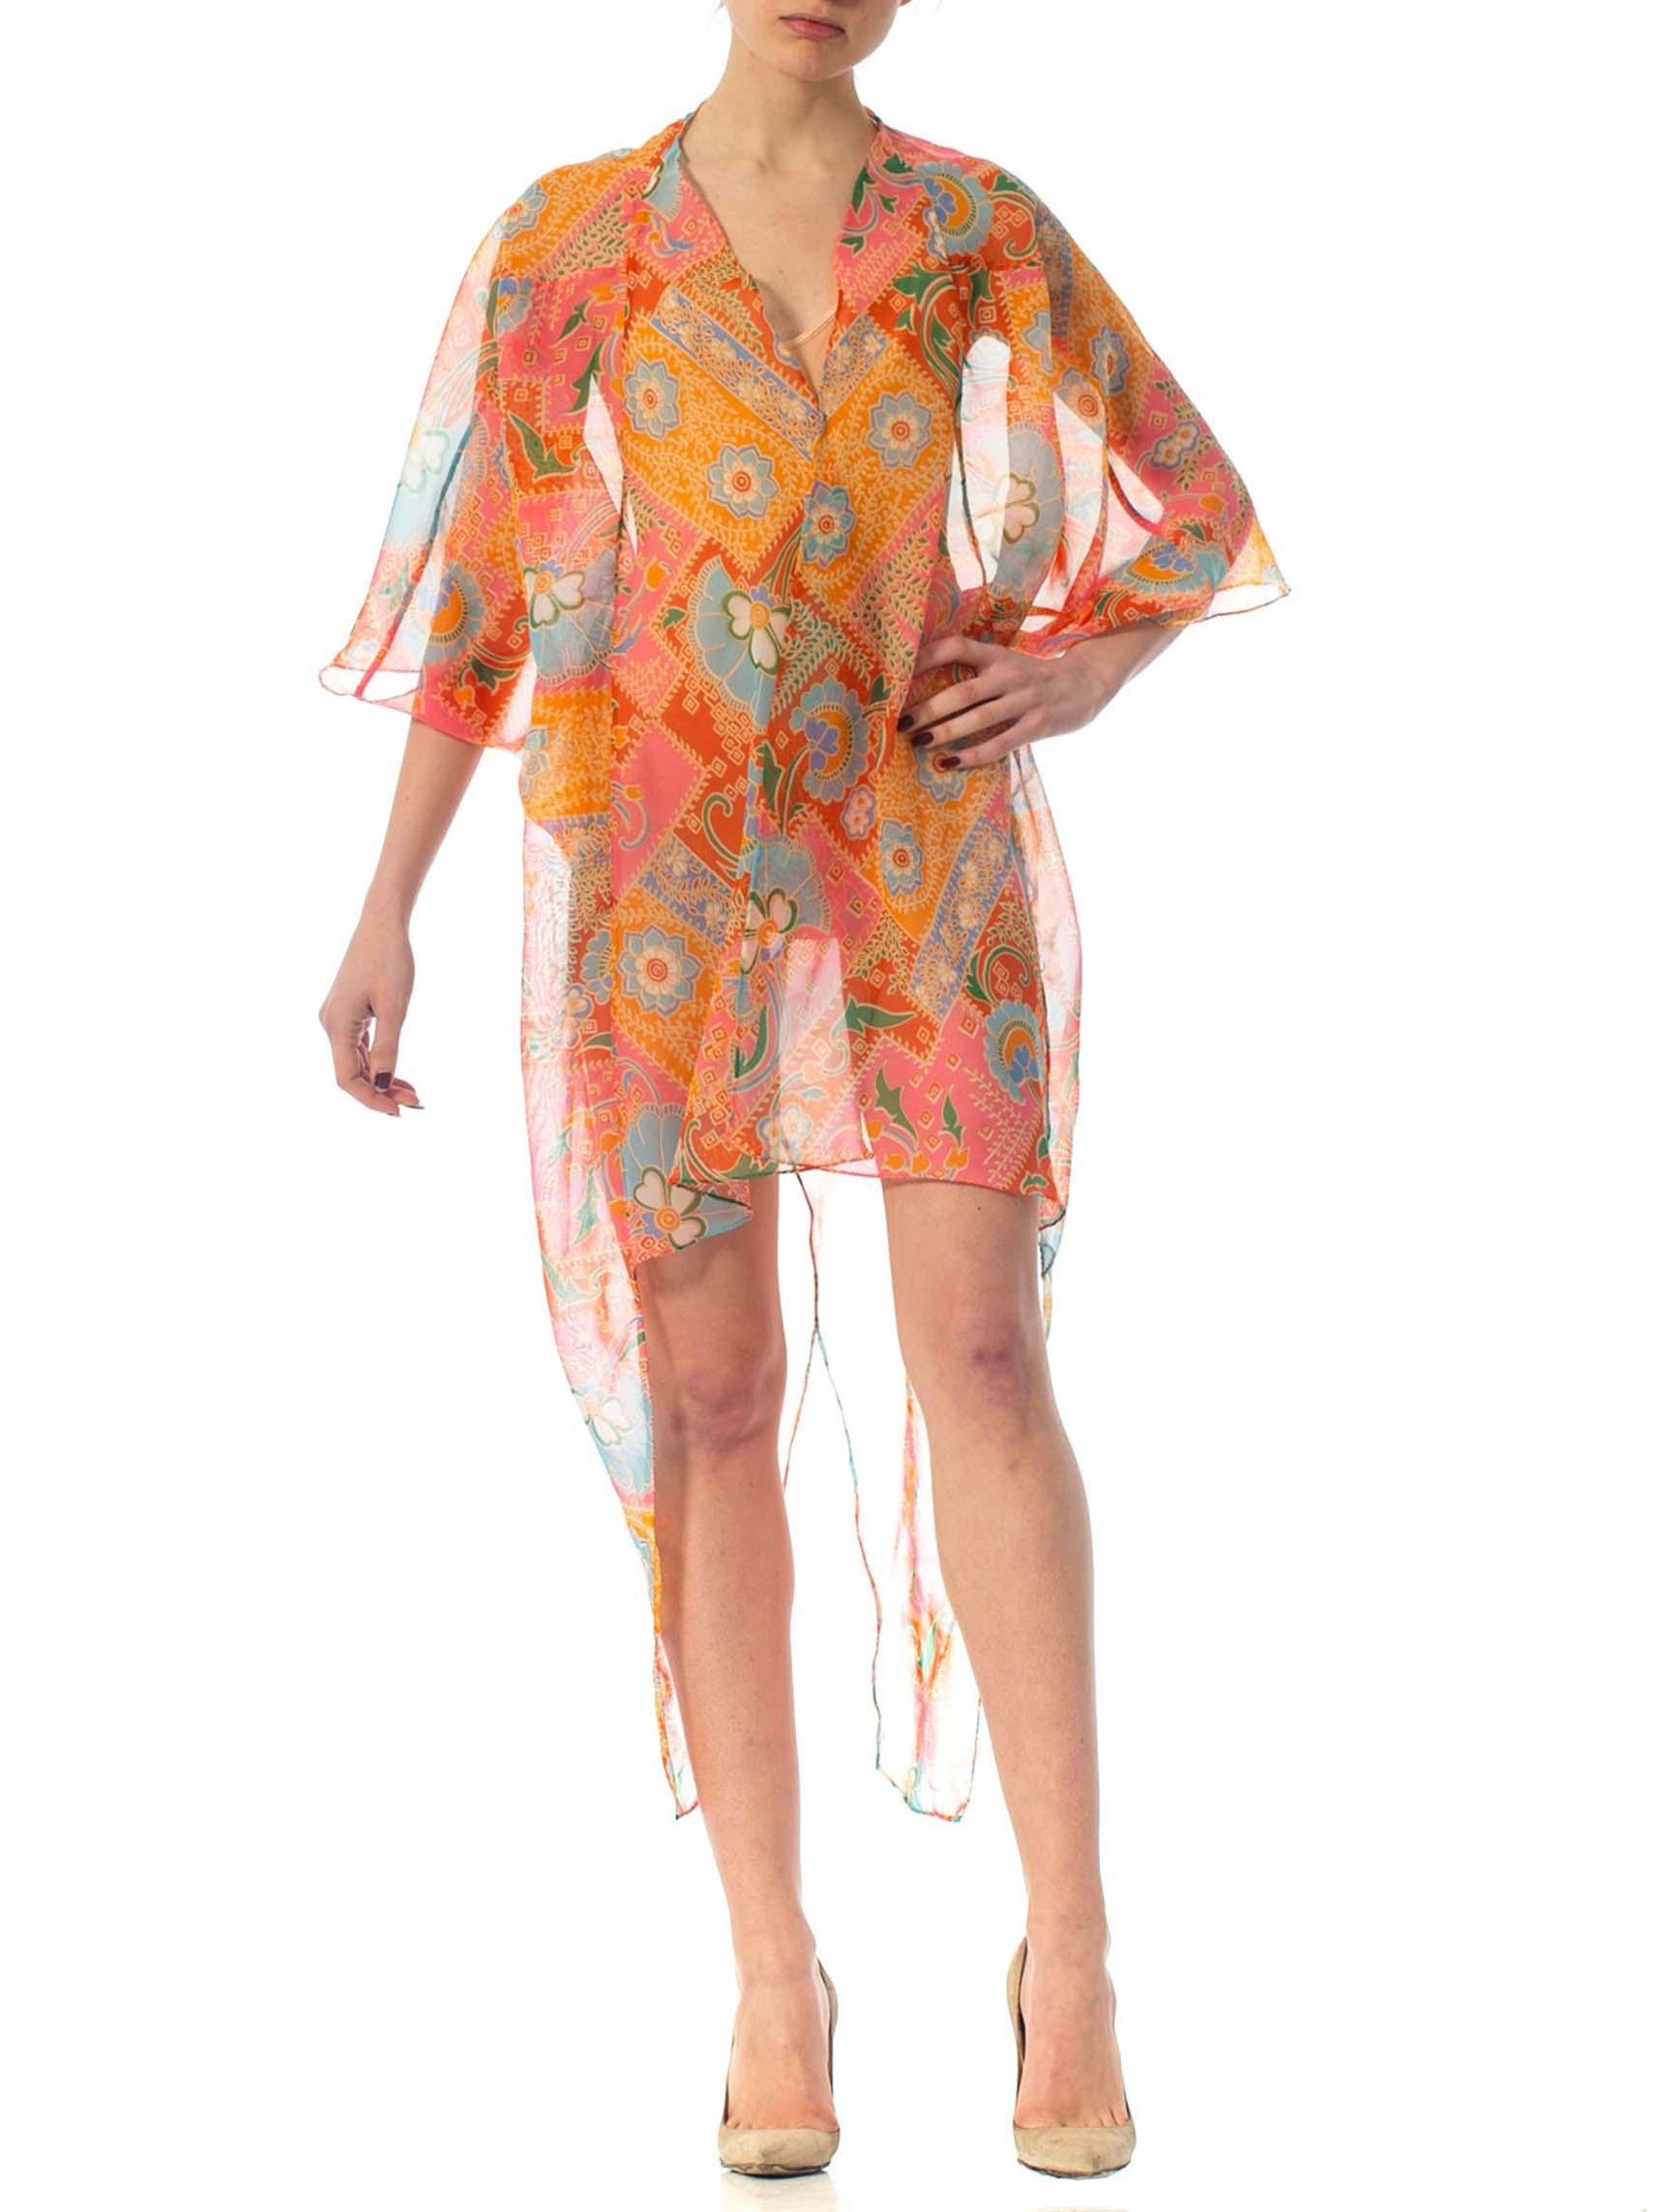 MORPHEW COLLECTION Psychedelic Polyester Organza Beach Cover-Up Cocoon 3